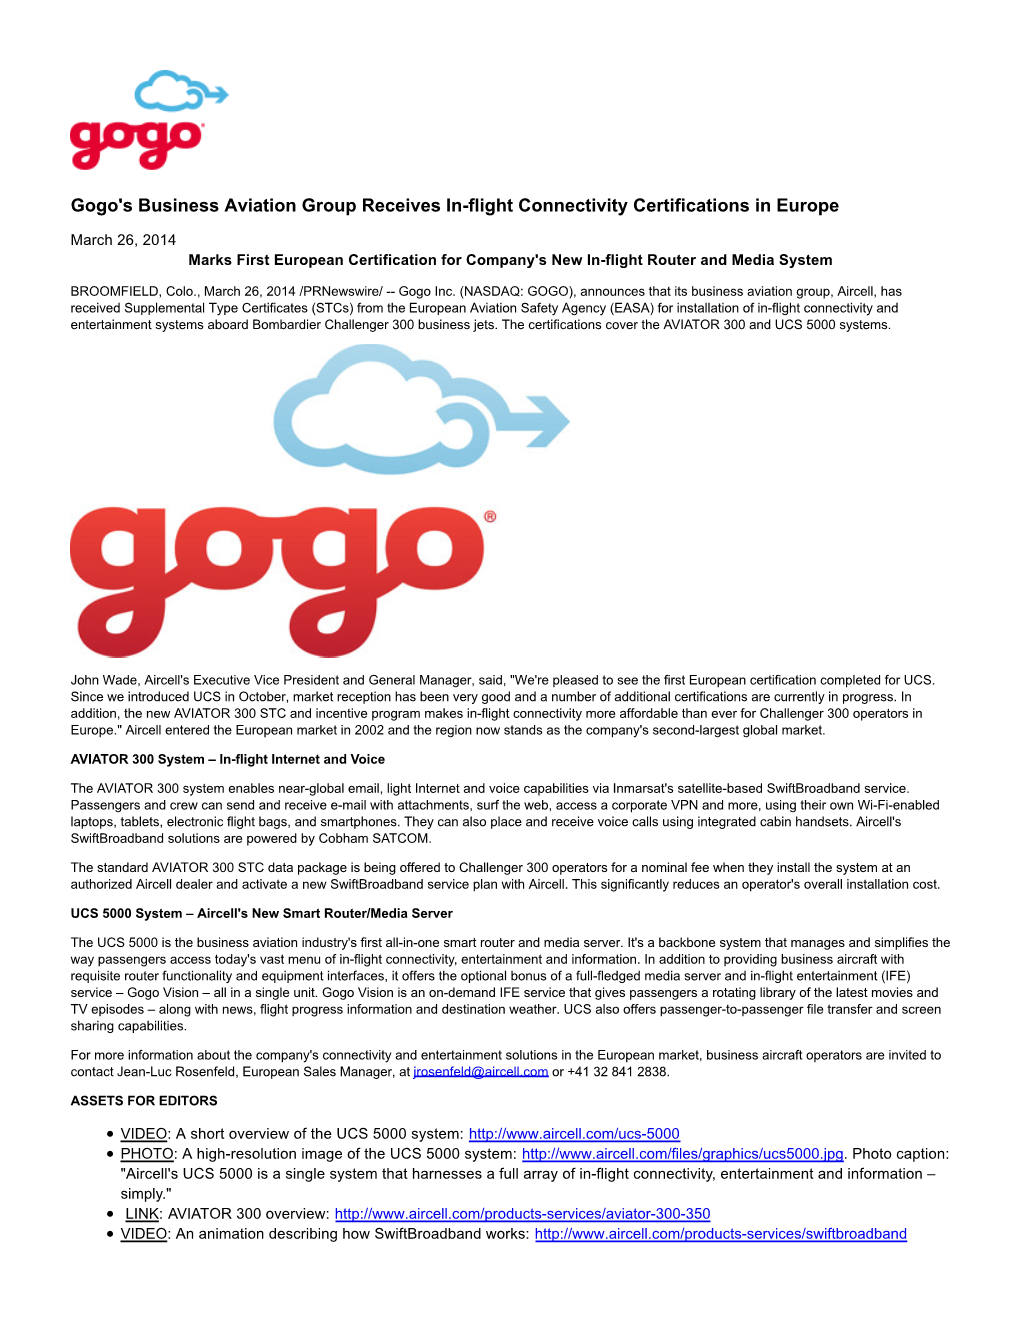 Gogo's Business Aviation Group Receives In-Flight Connectivity Certifications in Europe